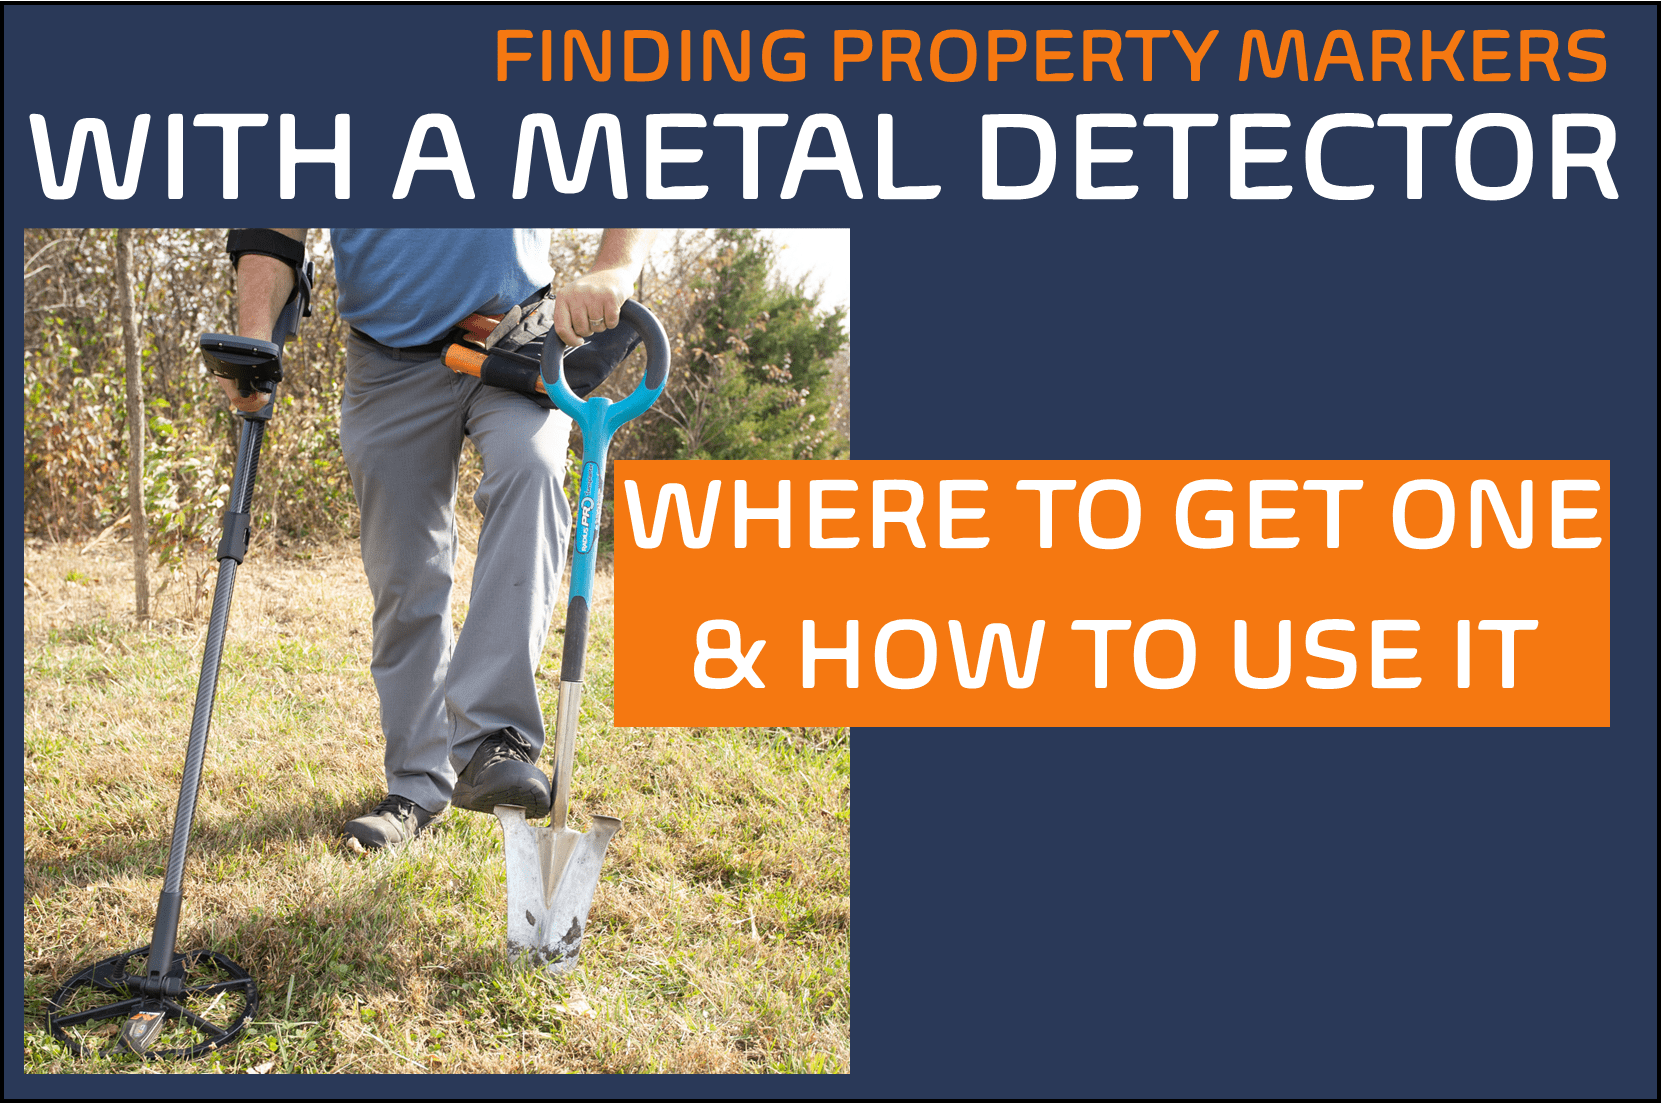 FAQ: How do I use a metal detector to find property pins/markers?